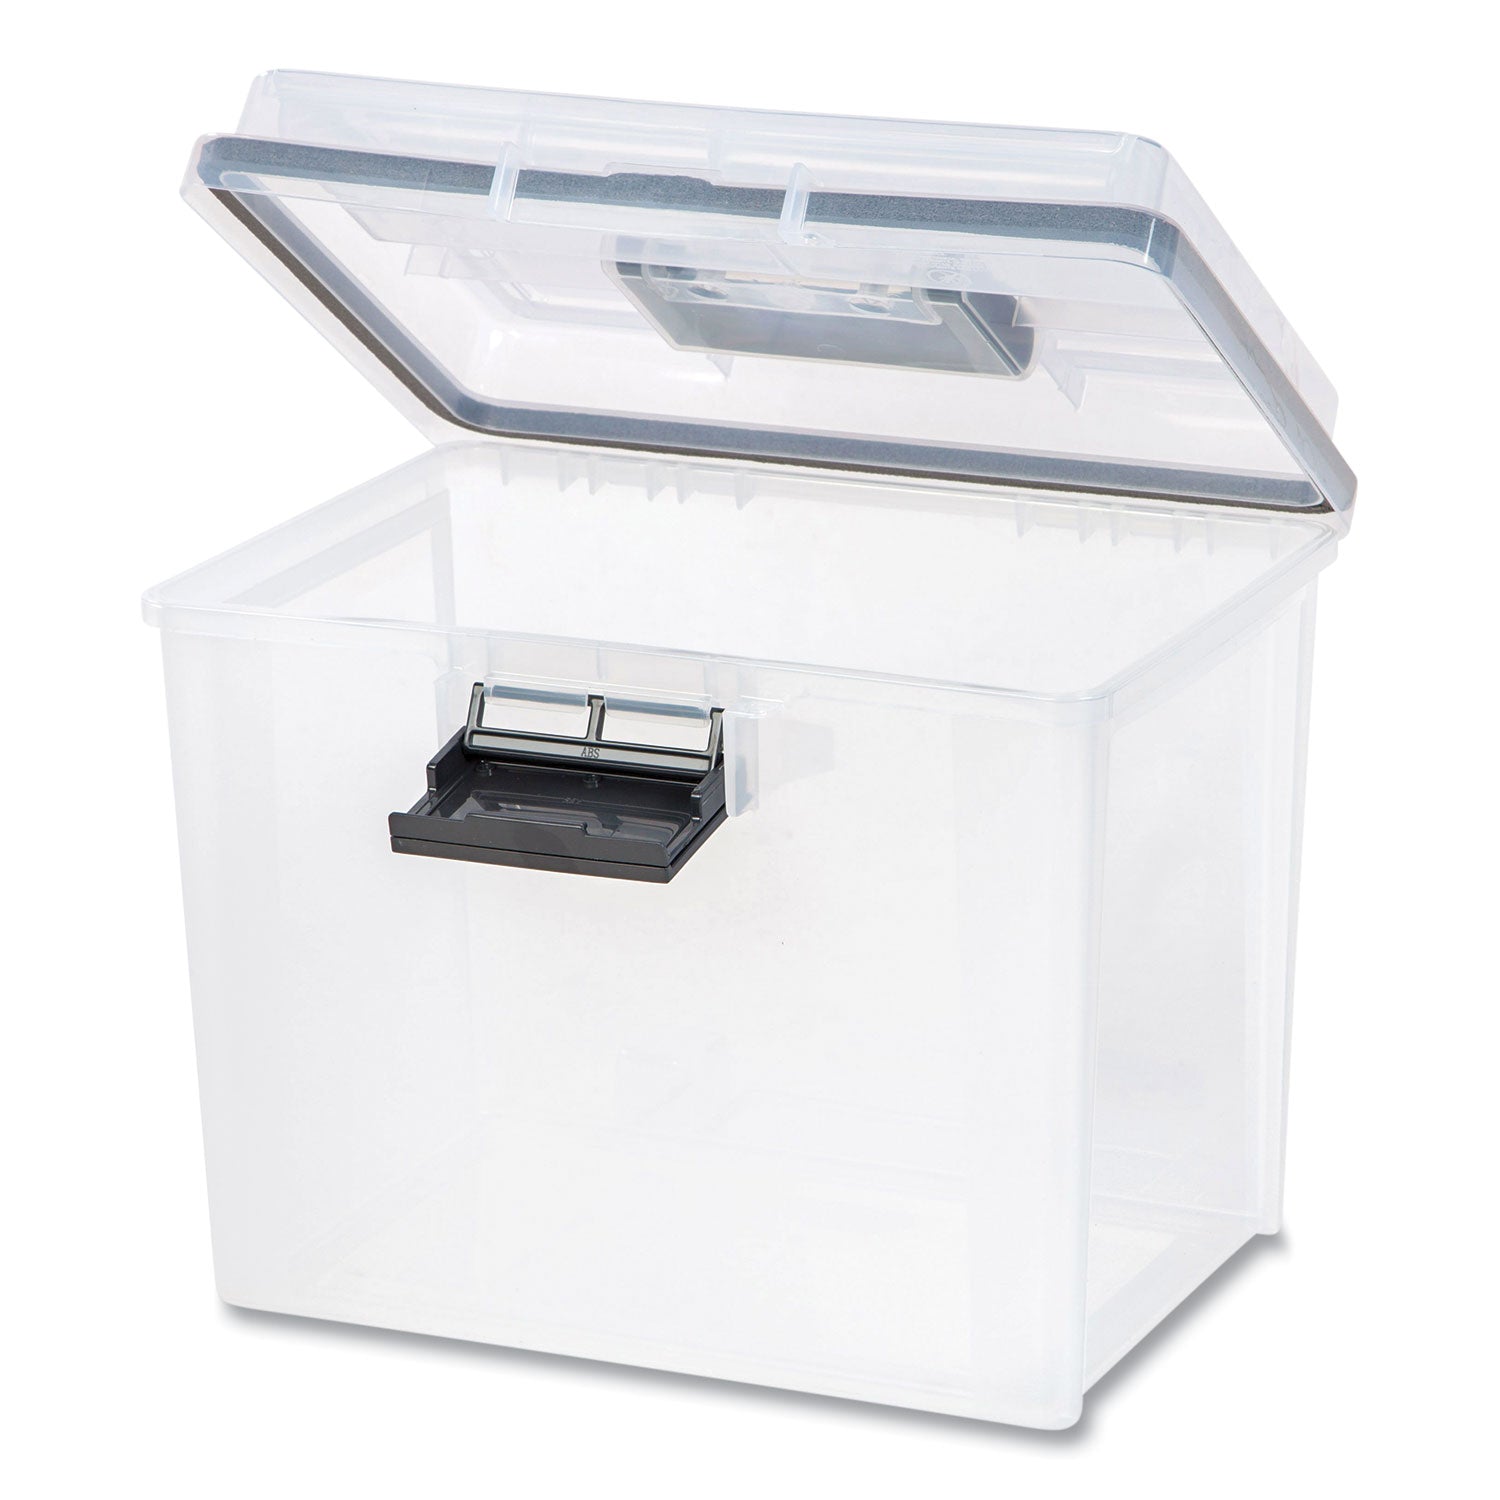 weathertight-portable-file-box-letter-files-137-x-104-x-118-clear-gray-accents_irs110351 - 2